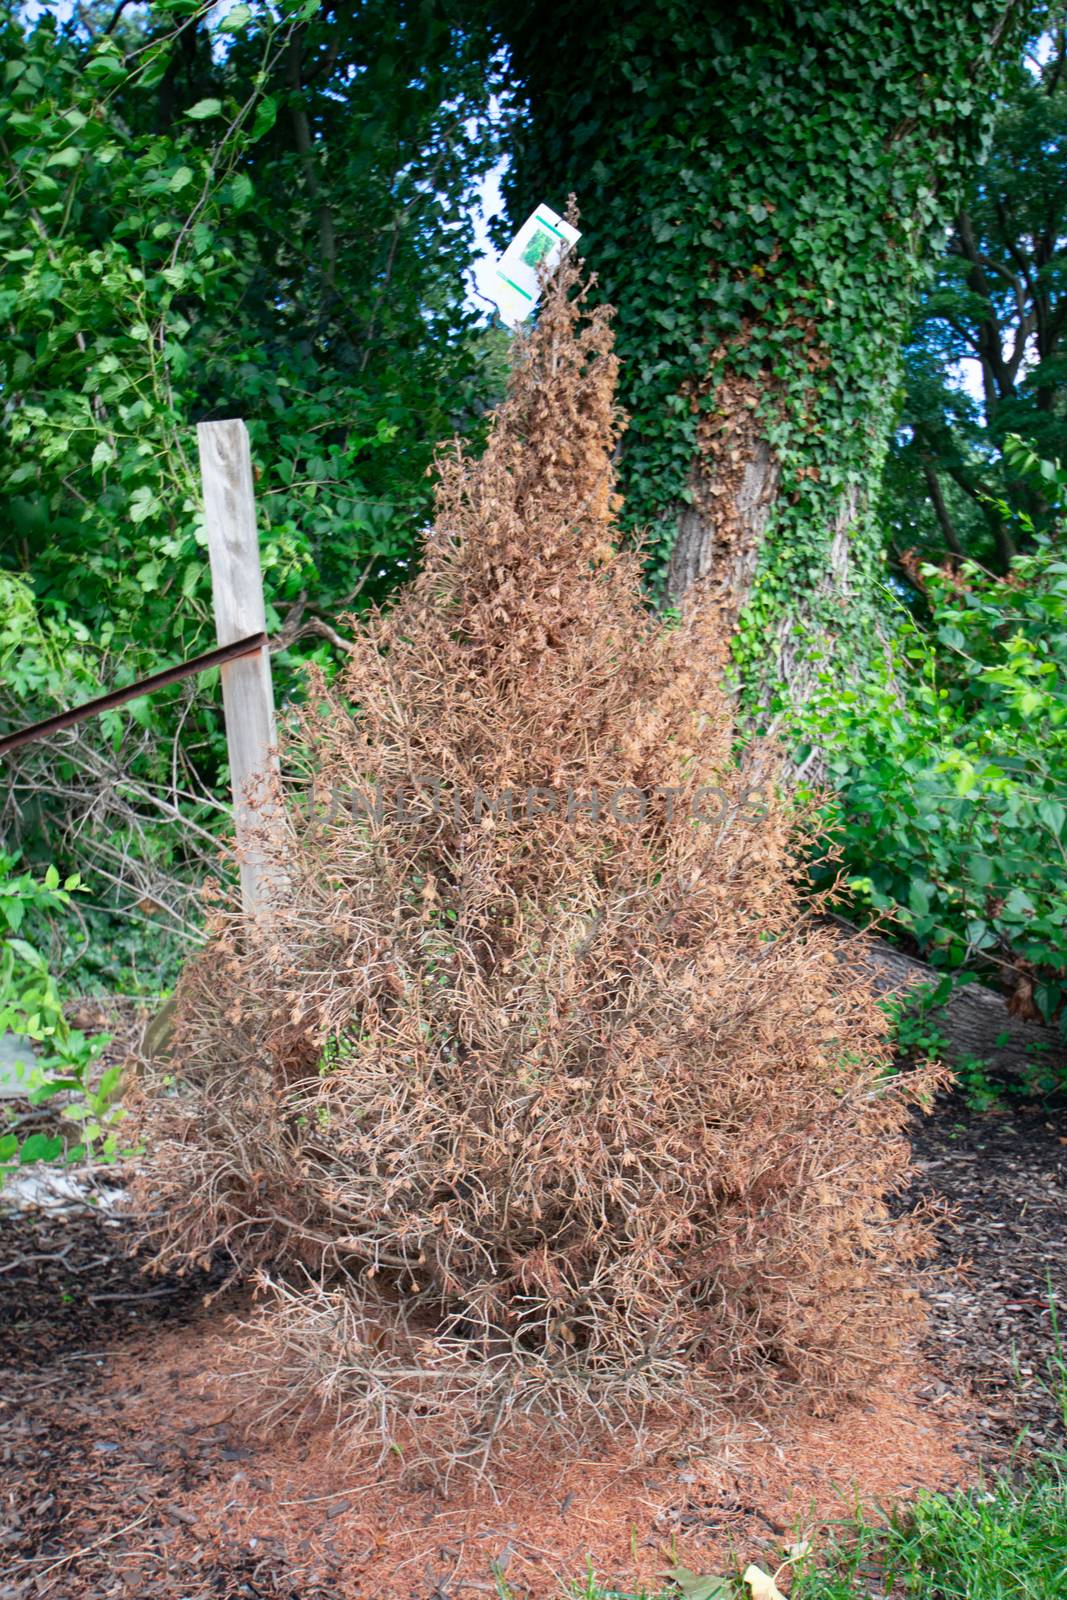 A Dead Evergreen Tree Covered in Brown Needles by bju12290